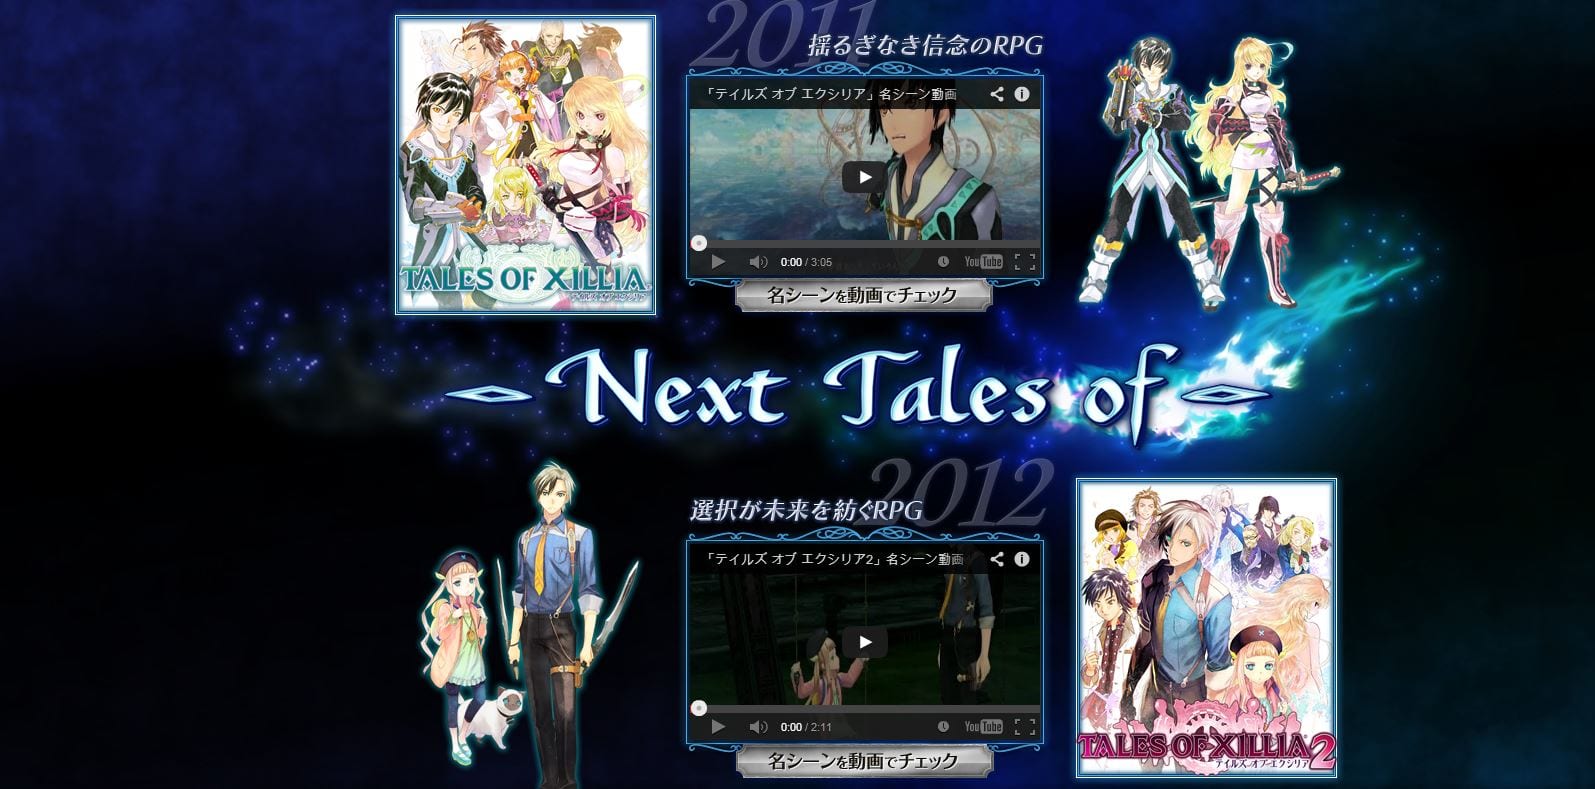 Get your potentially final plementary wallpapers as tales series countdown reaches its end